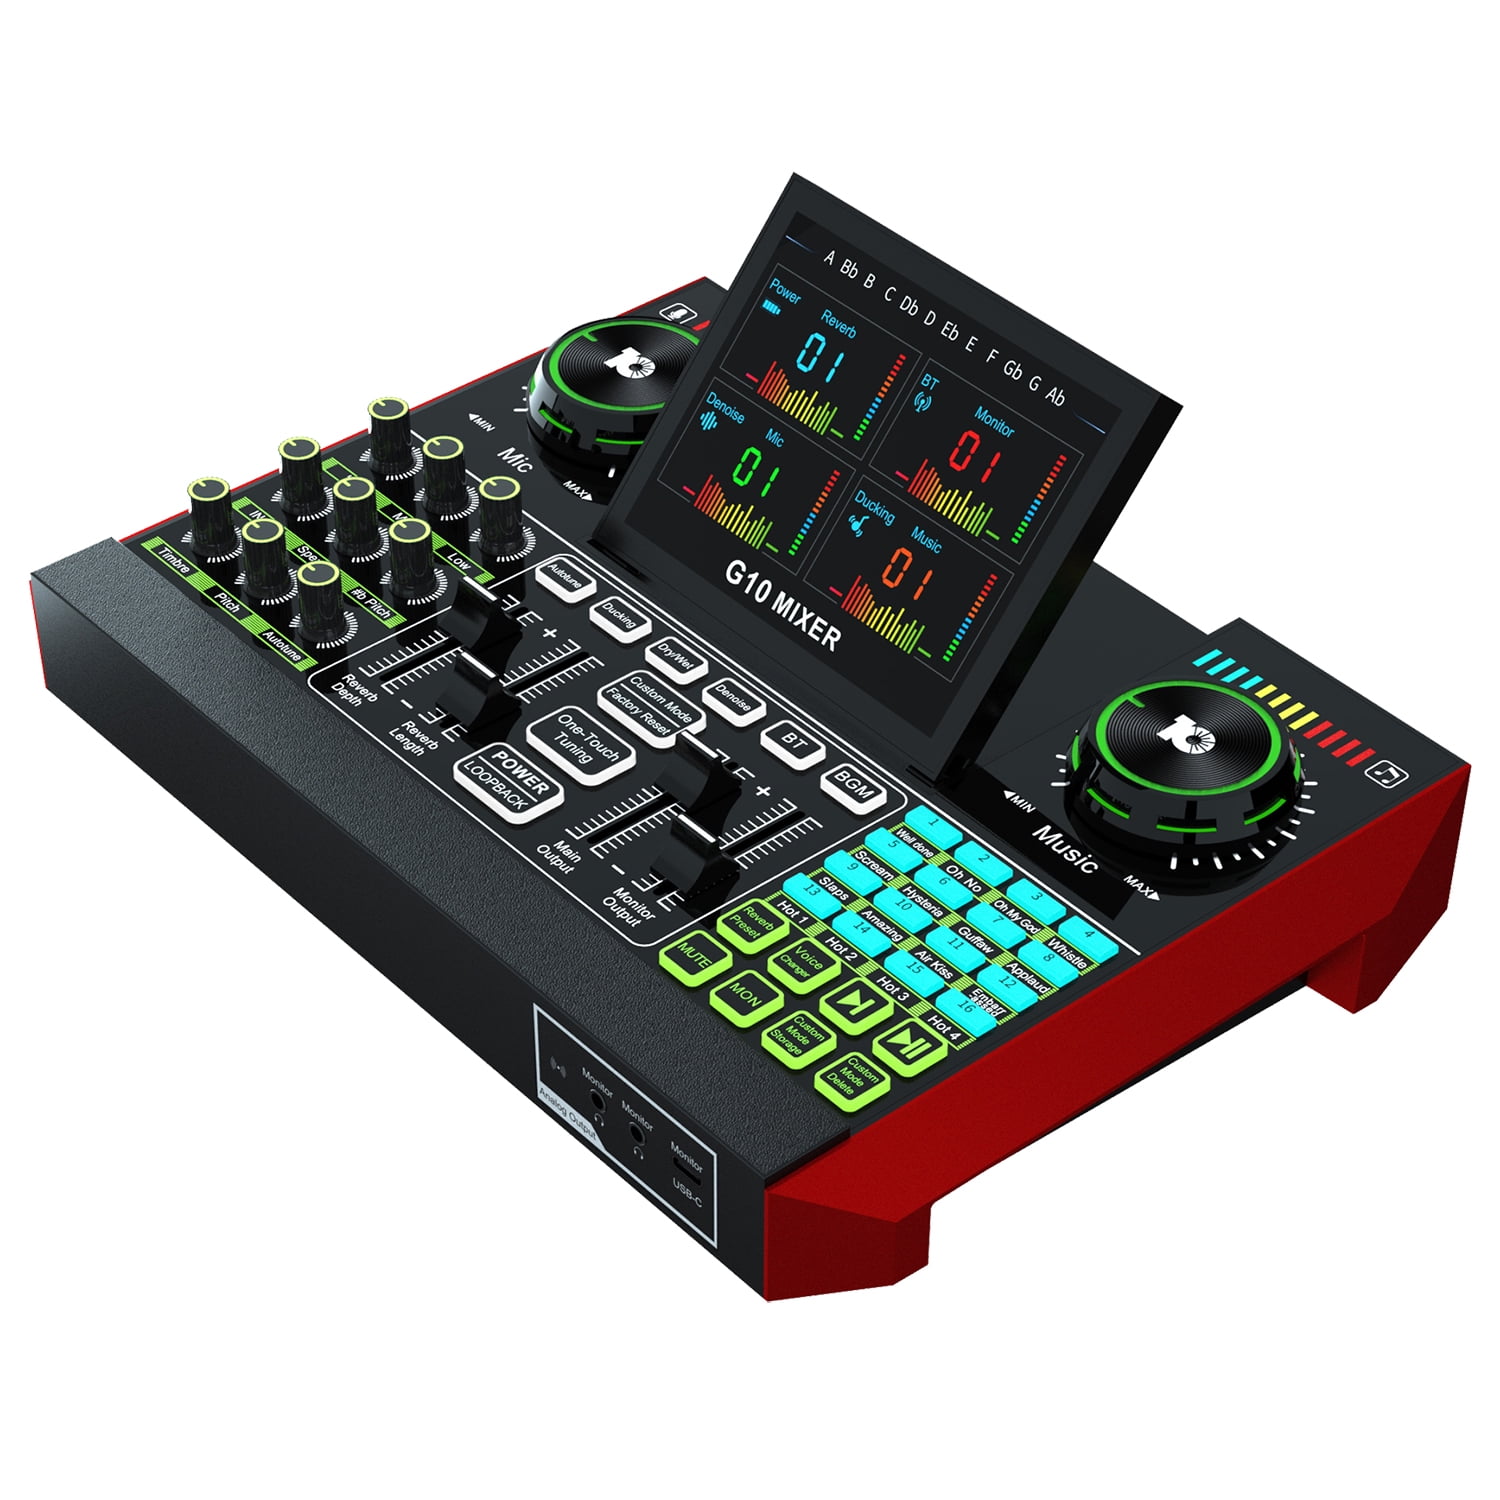 USB Audio Interface with Mixer & Vocal Effects, G10 Multi-Channel Sound Mixer Board Voice Changer, All-in-one XLR Studio DJ Equipment for Phone PC Online Live Streaming Podcast Walmart.com